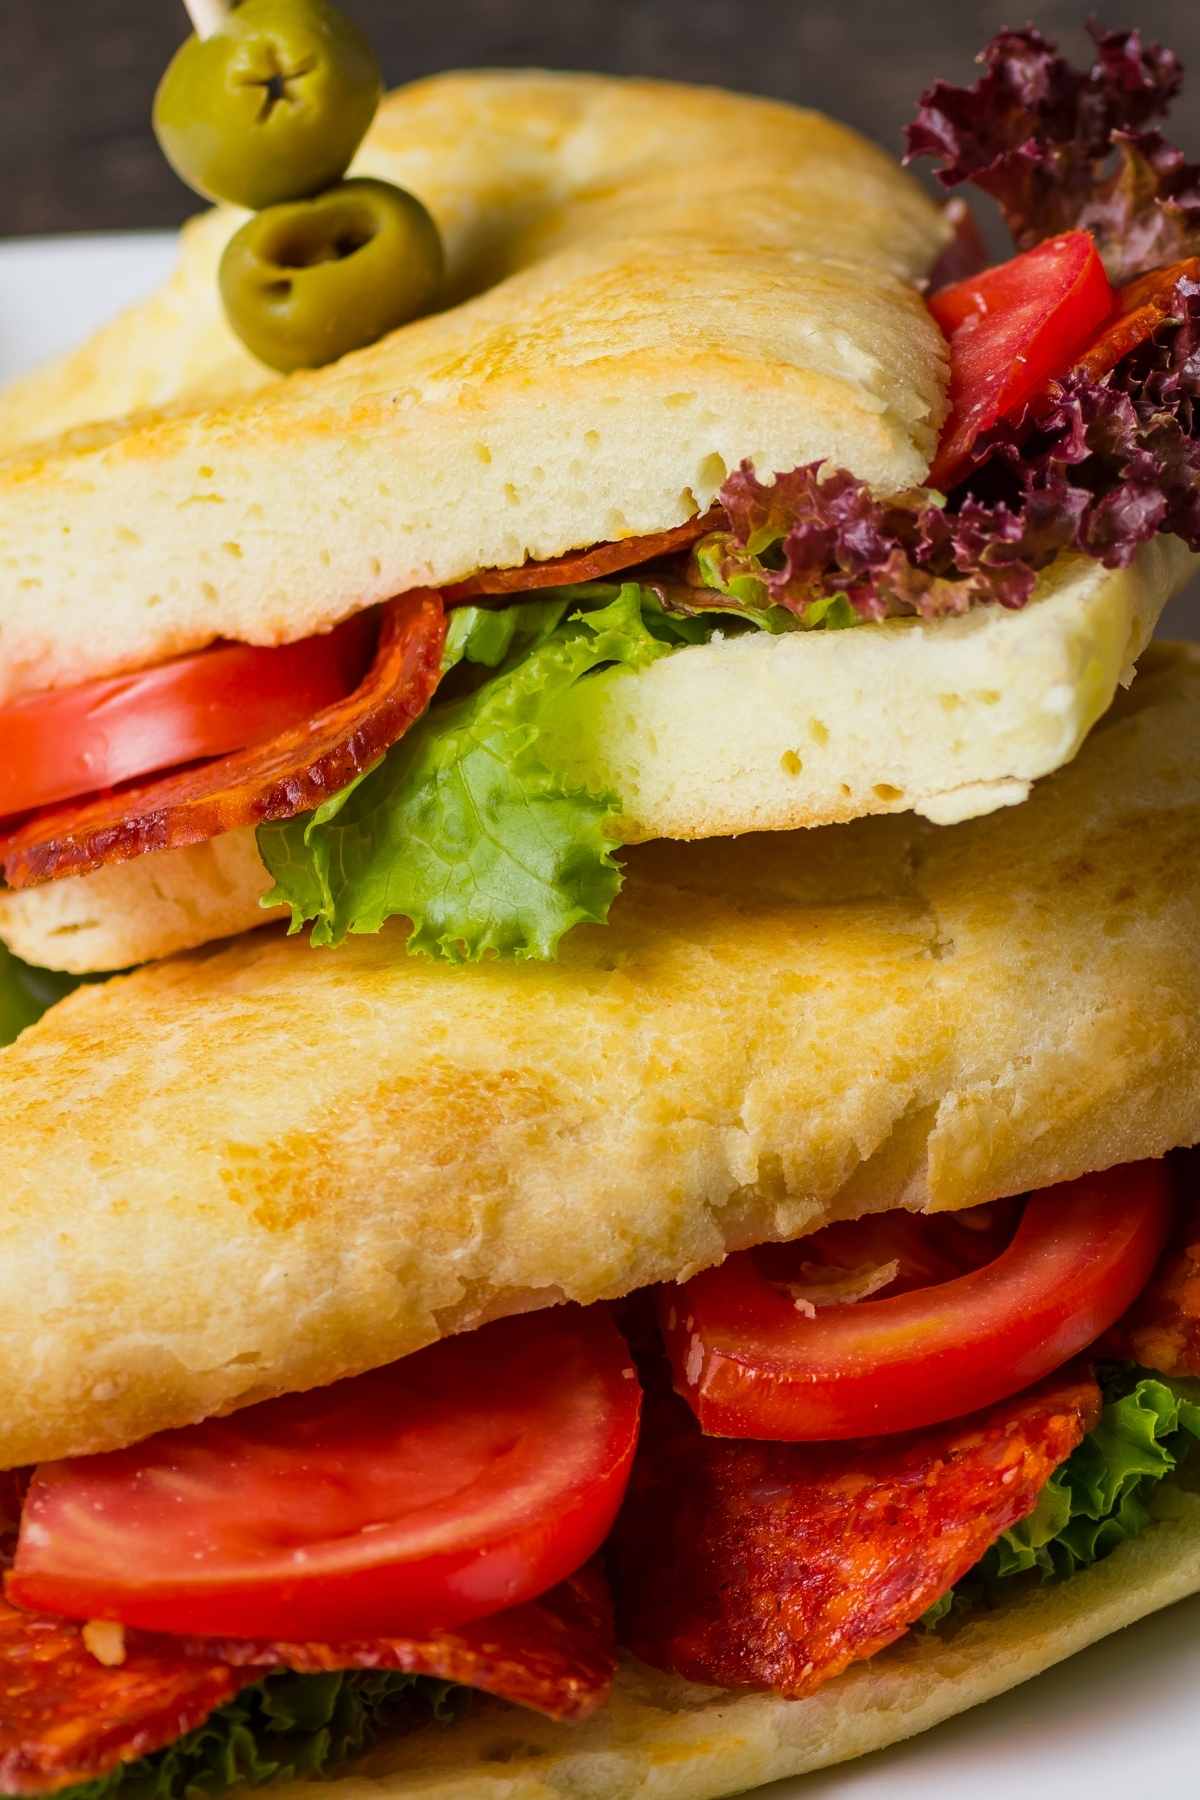 If you’re craving a meal that’s hearty and big on flavor, this Italian pepperoni sandwich is just what you need. It’s loaded with slices of pepperoni, salami, ham, and mozzarella cheese.